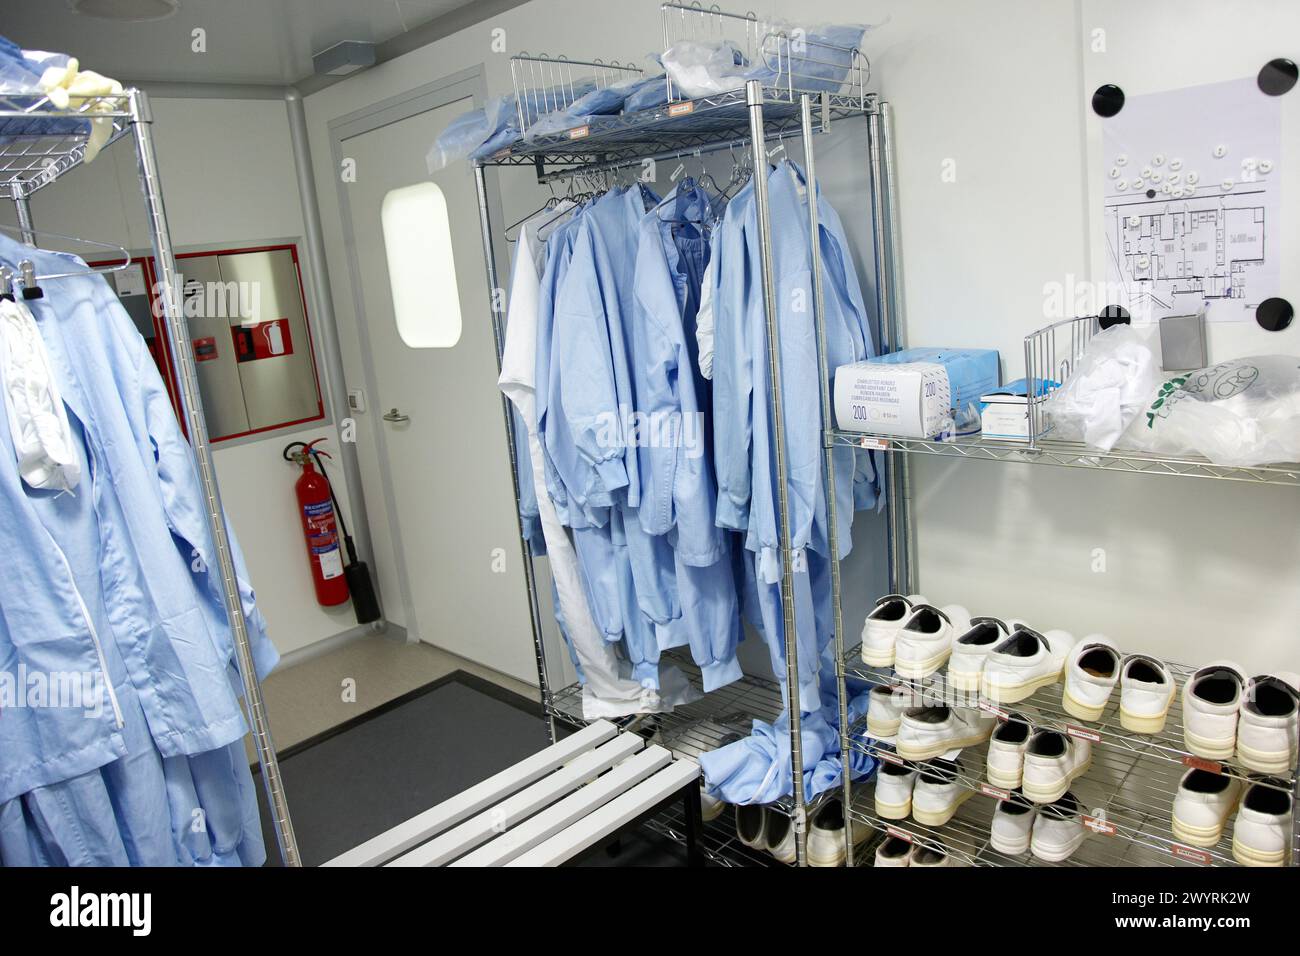 Cleanroom, garment, Microelectronics and Microsystems Unit, CEIT (Center of Studies and Technical Research), University of Navarra, Donostia, Gipuzkoa, Basque Country, Spain. Stock Photo